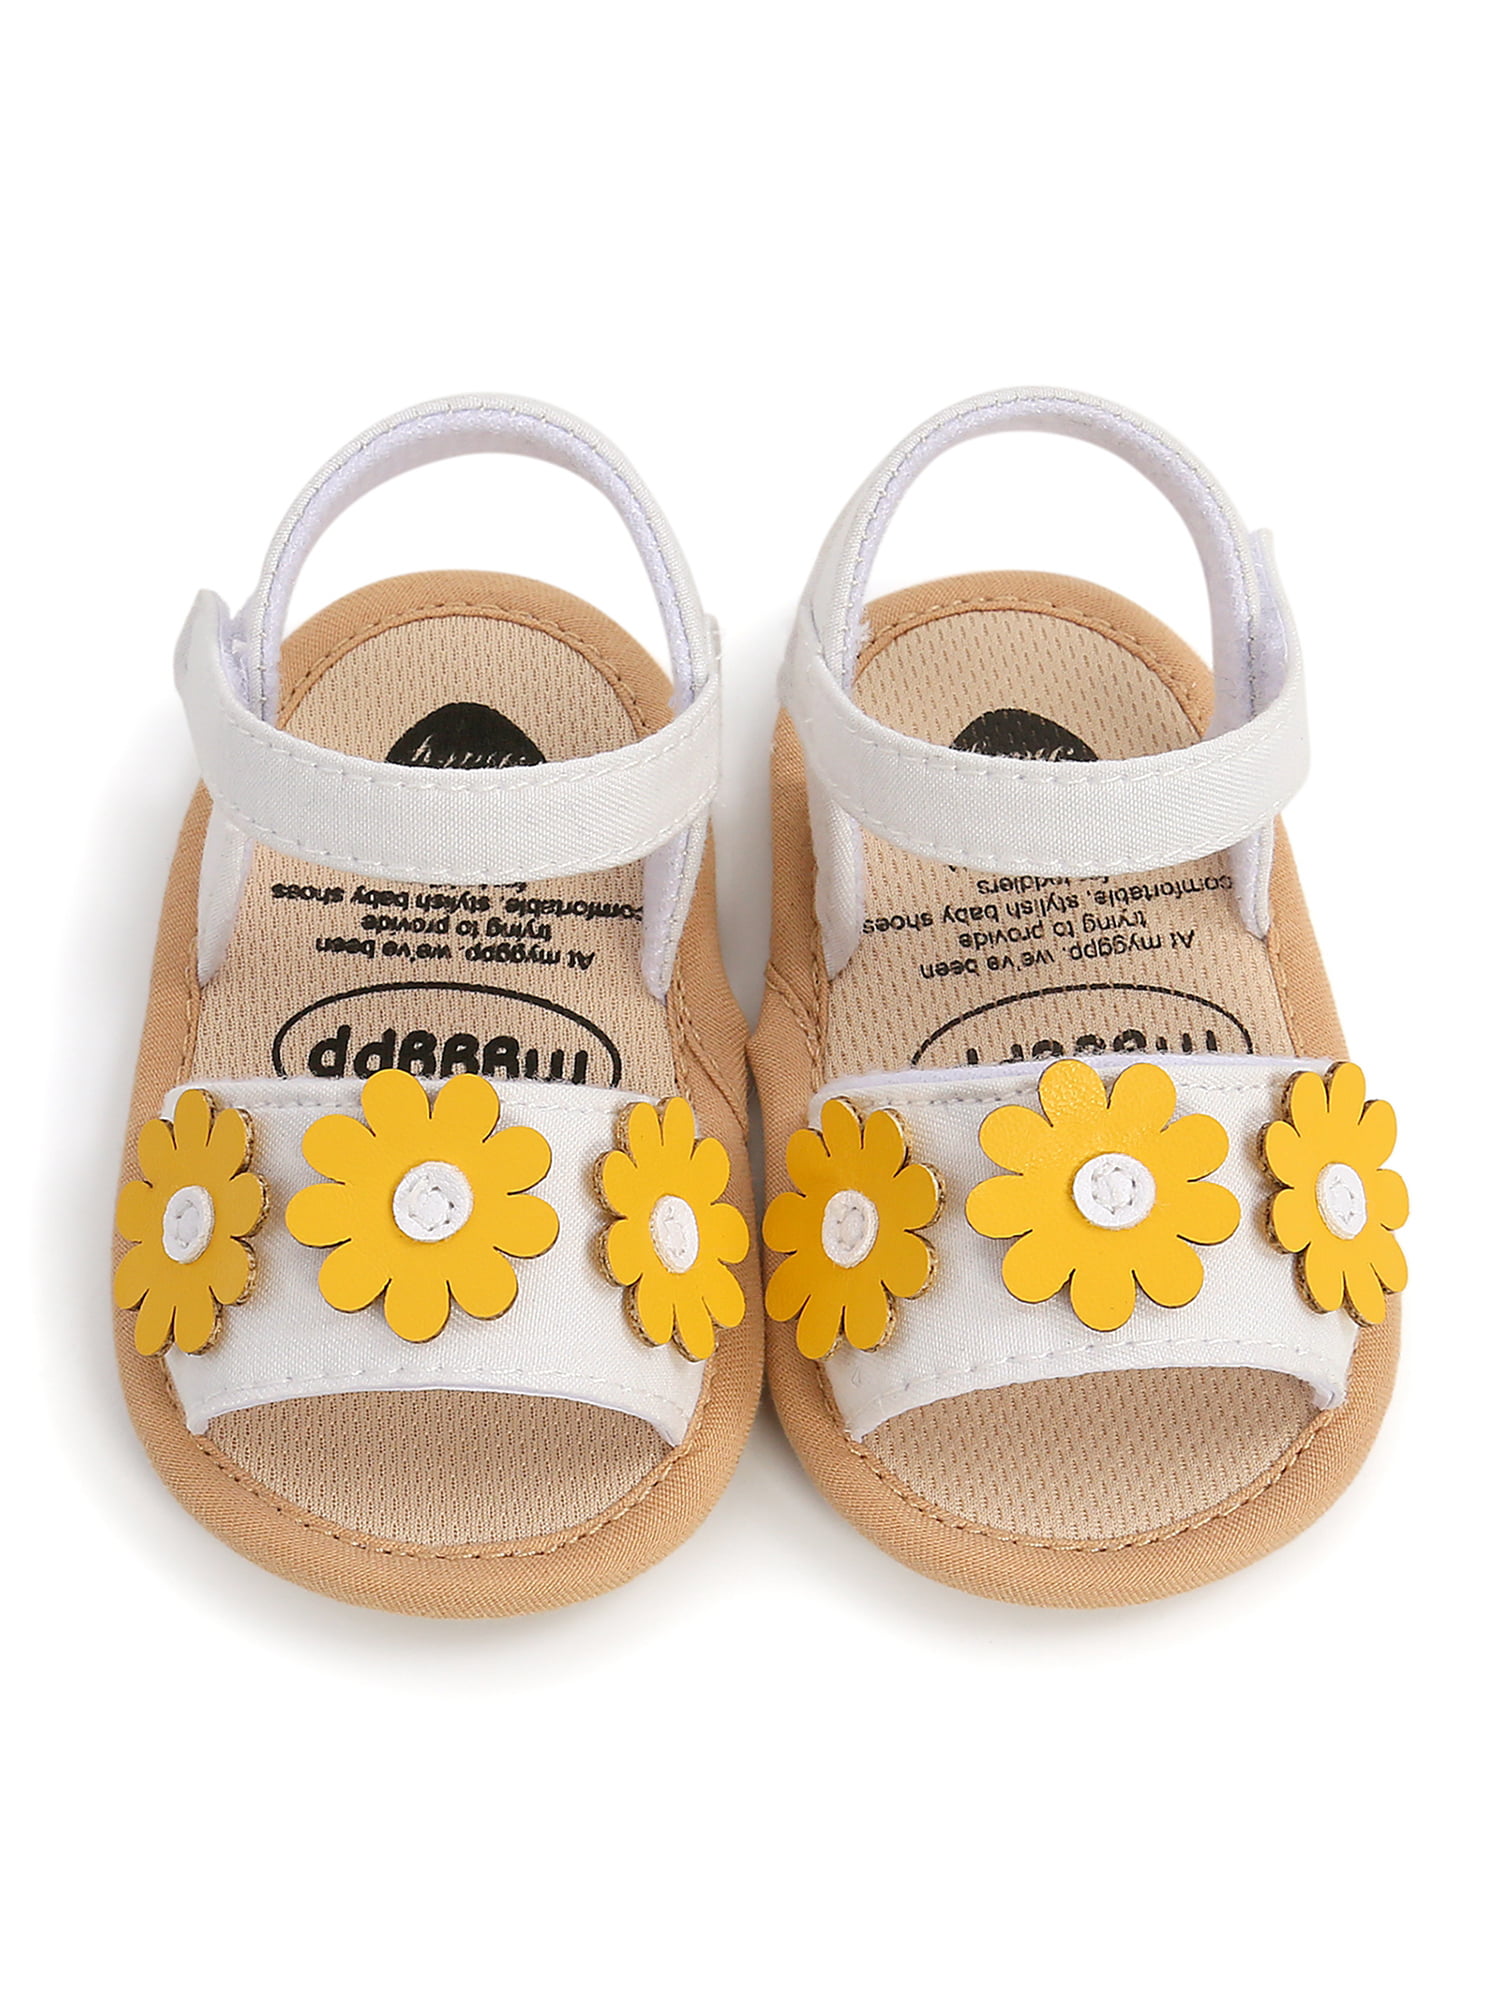 summer dress shoes 06 months baby sandals flower baby shoes gladiator sandals ready to ship